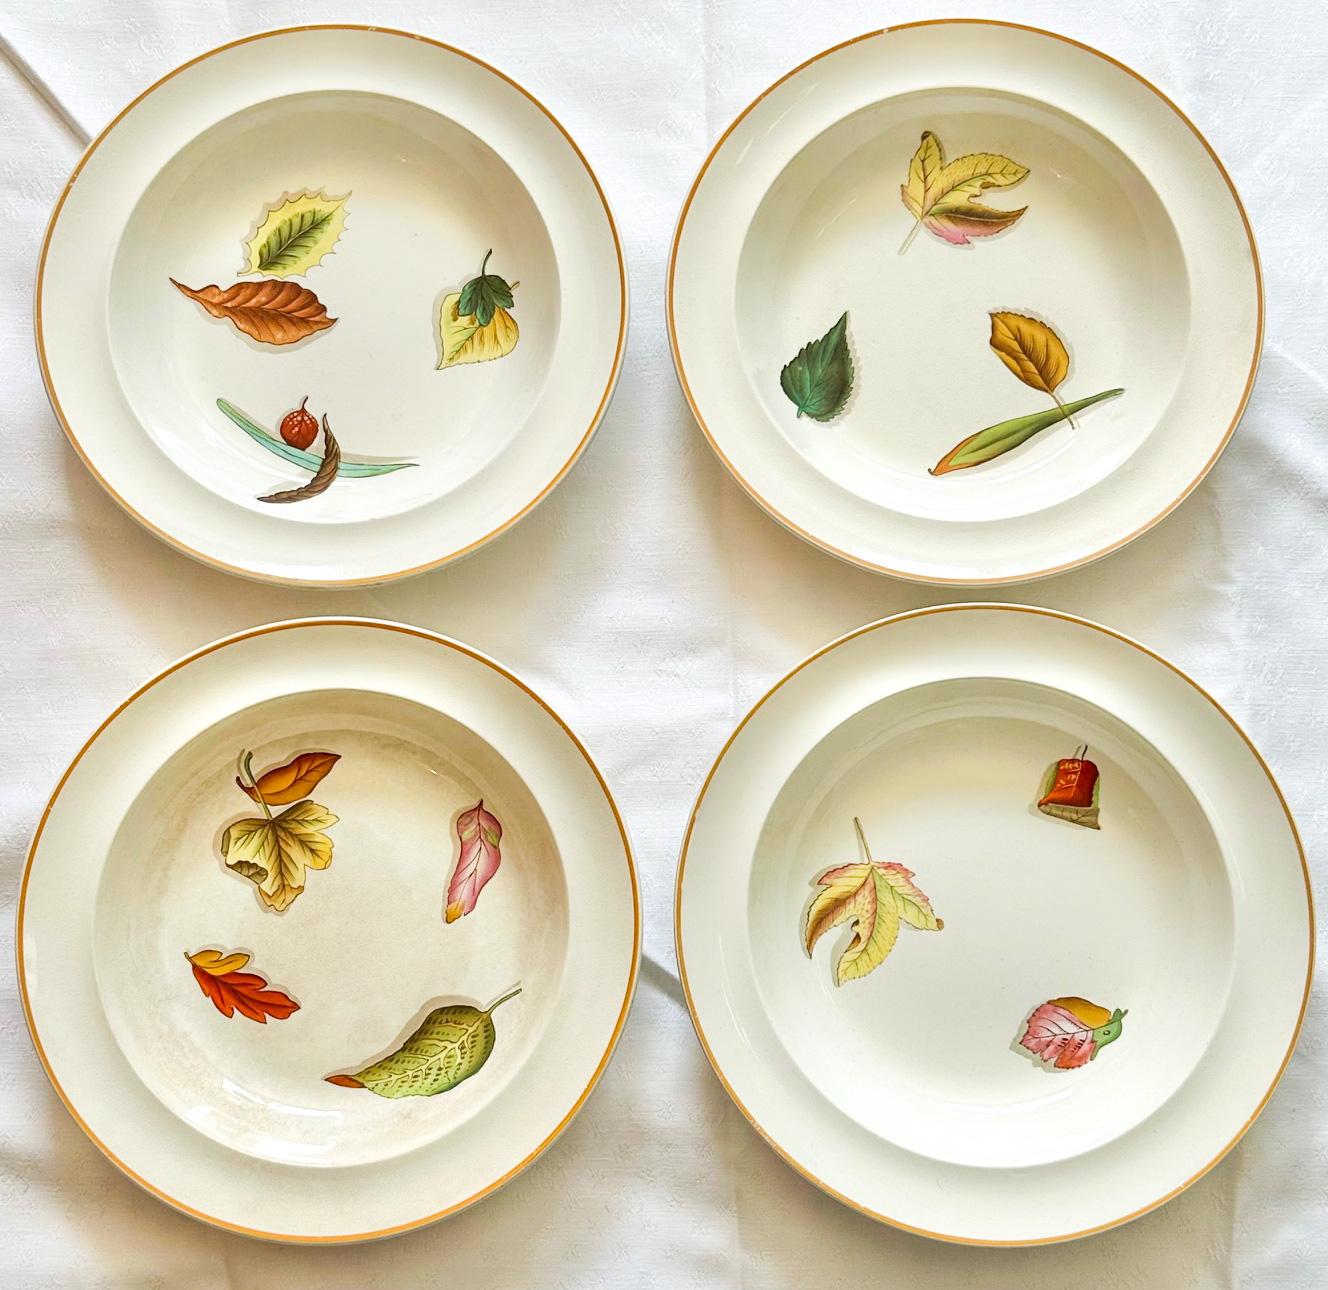 Offered is an extremely rare set of 4 hand-painted 1790-1810 creamware shallow soup bowls, by famed English potter Josiah Wedgwood. Only a few pieces remain in this coveted pattern, called 